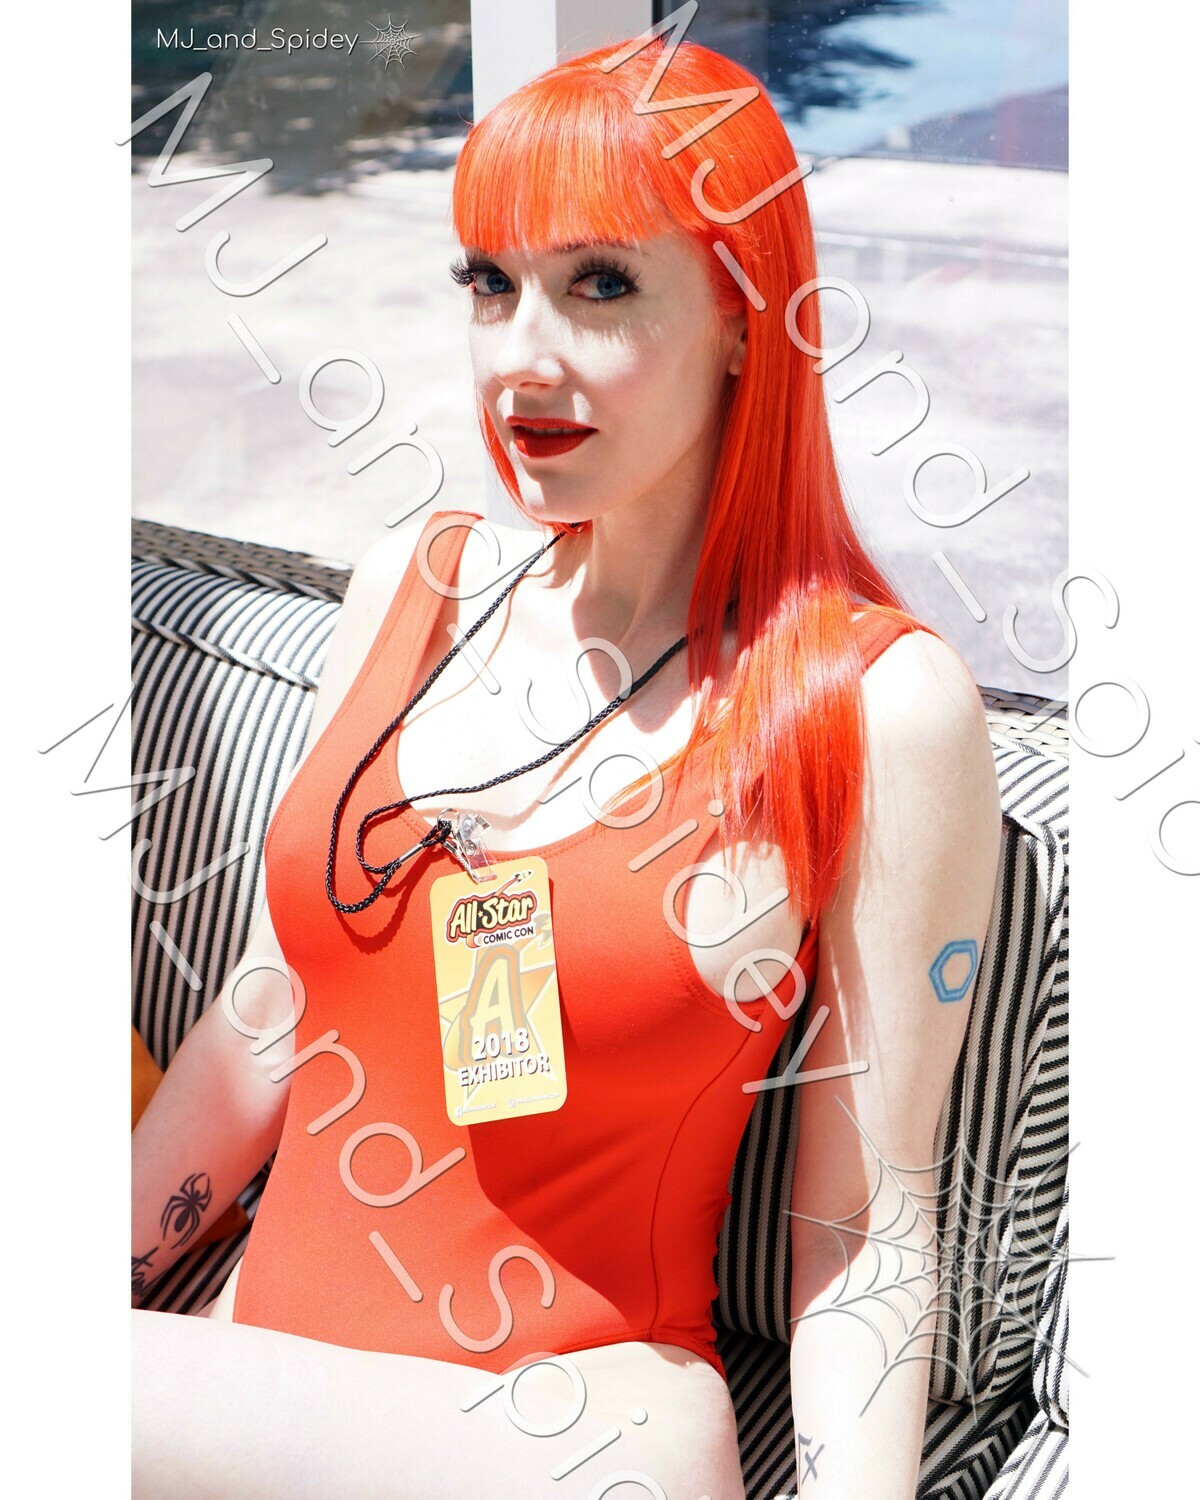 Marvel - Spider-Man - Mary Jane Watson - Swimsuit 1 - Cosplay Print (@MJ_and_Spidey, MJ and Spidey, Comics)